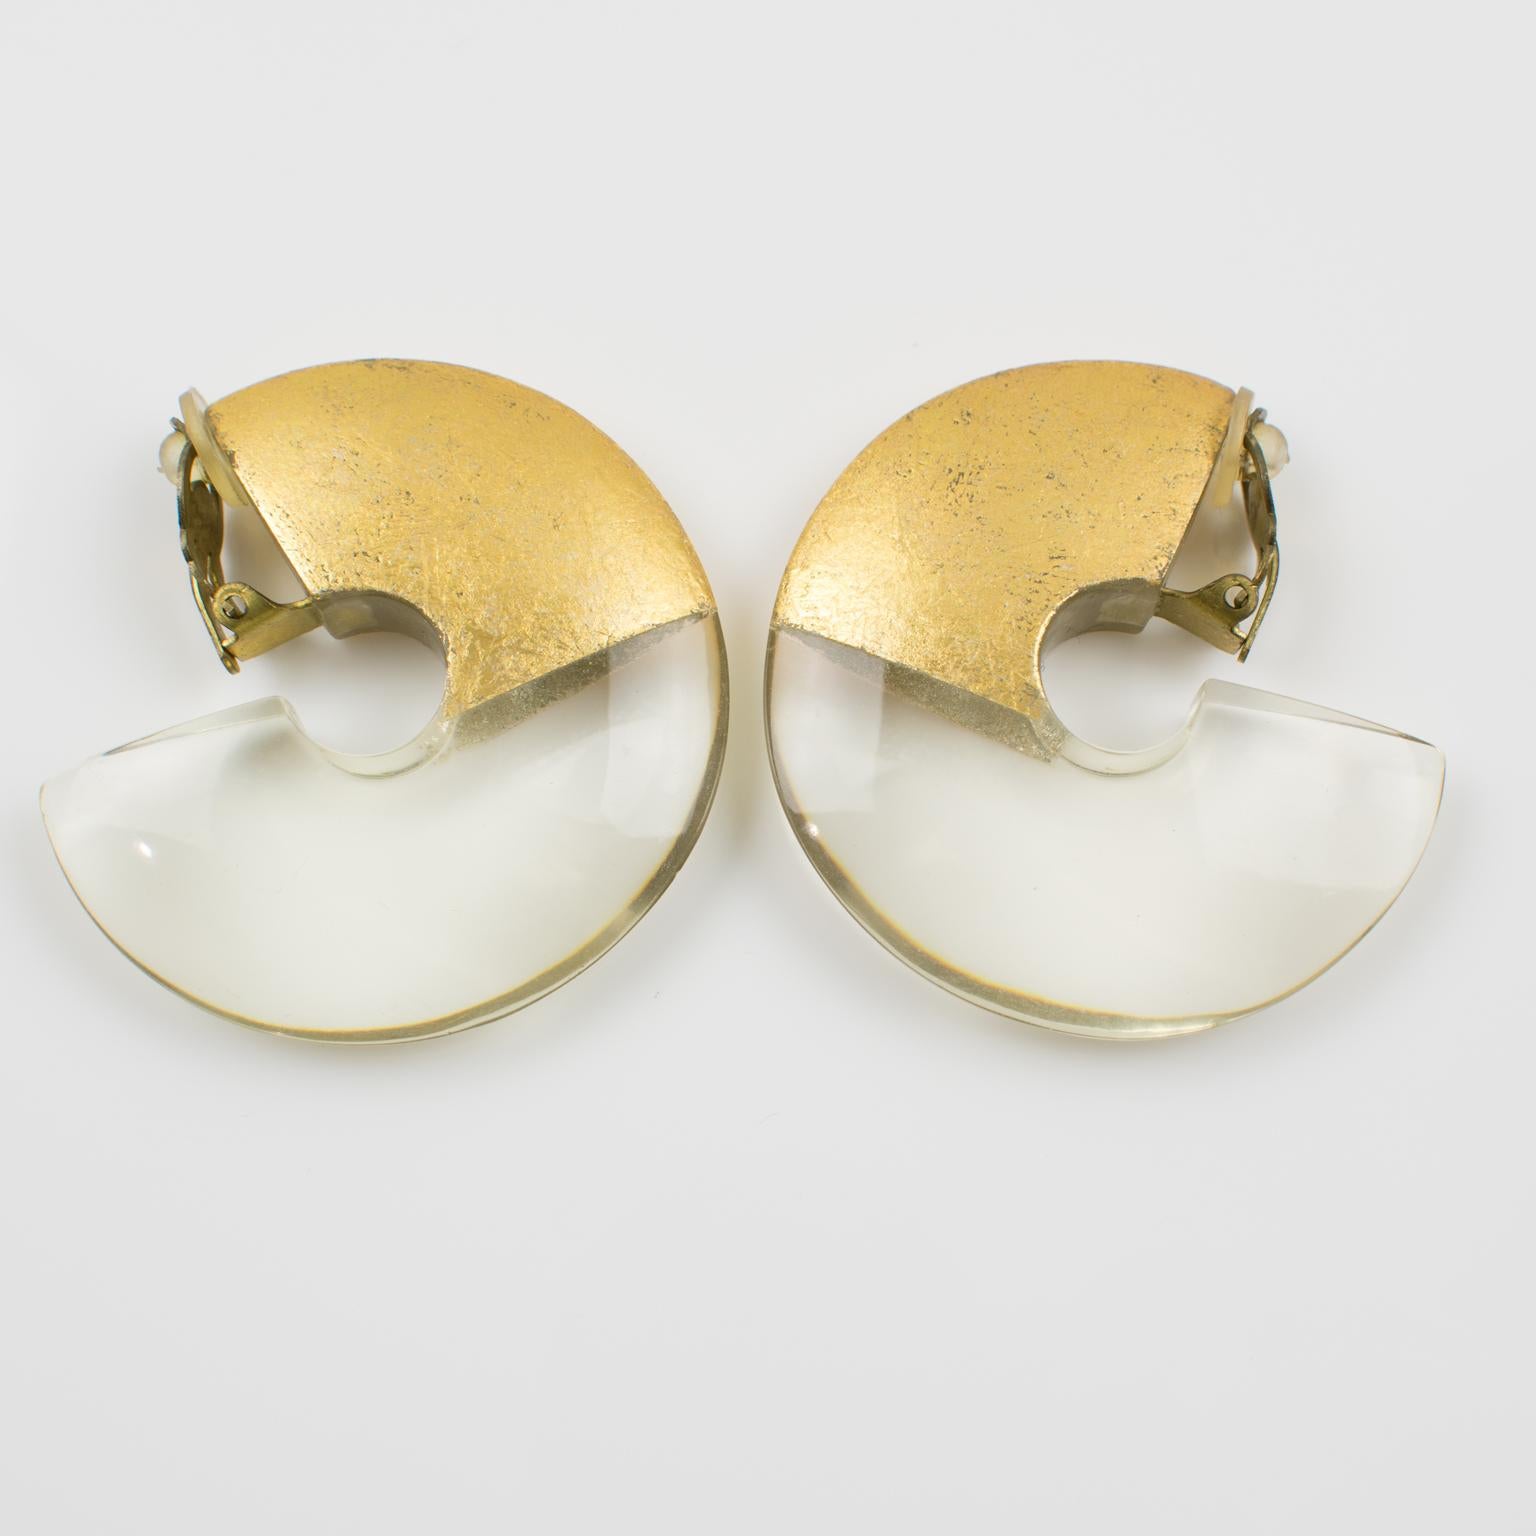 Stunning oversized clip on earrings by Gerda Lyngaard for Monies. Crystal clear Lucite and gold foil application. Marked 'Monies' on clasp. 
Measurements: 2.07 in. diameter (5.2 cm) x 0.38 in. thick (1 cm)